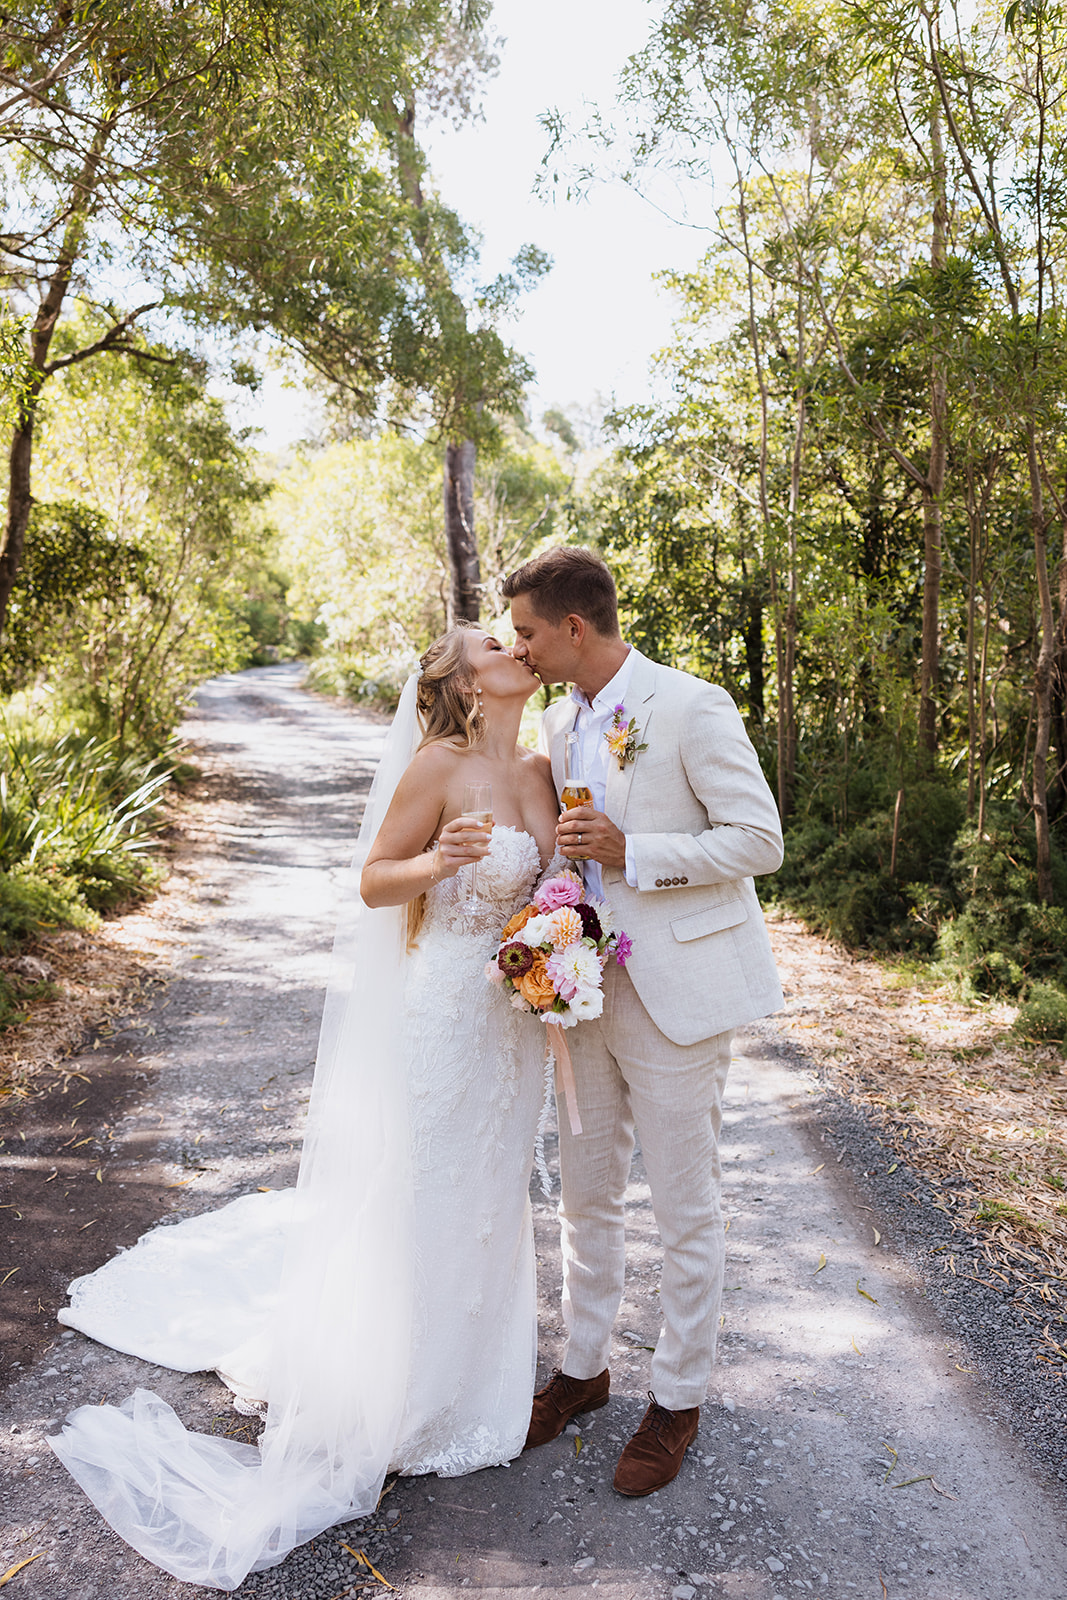 Bridal Portraits at the Wedding in The Cove Jervis Bay